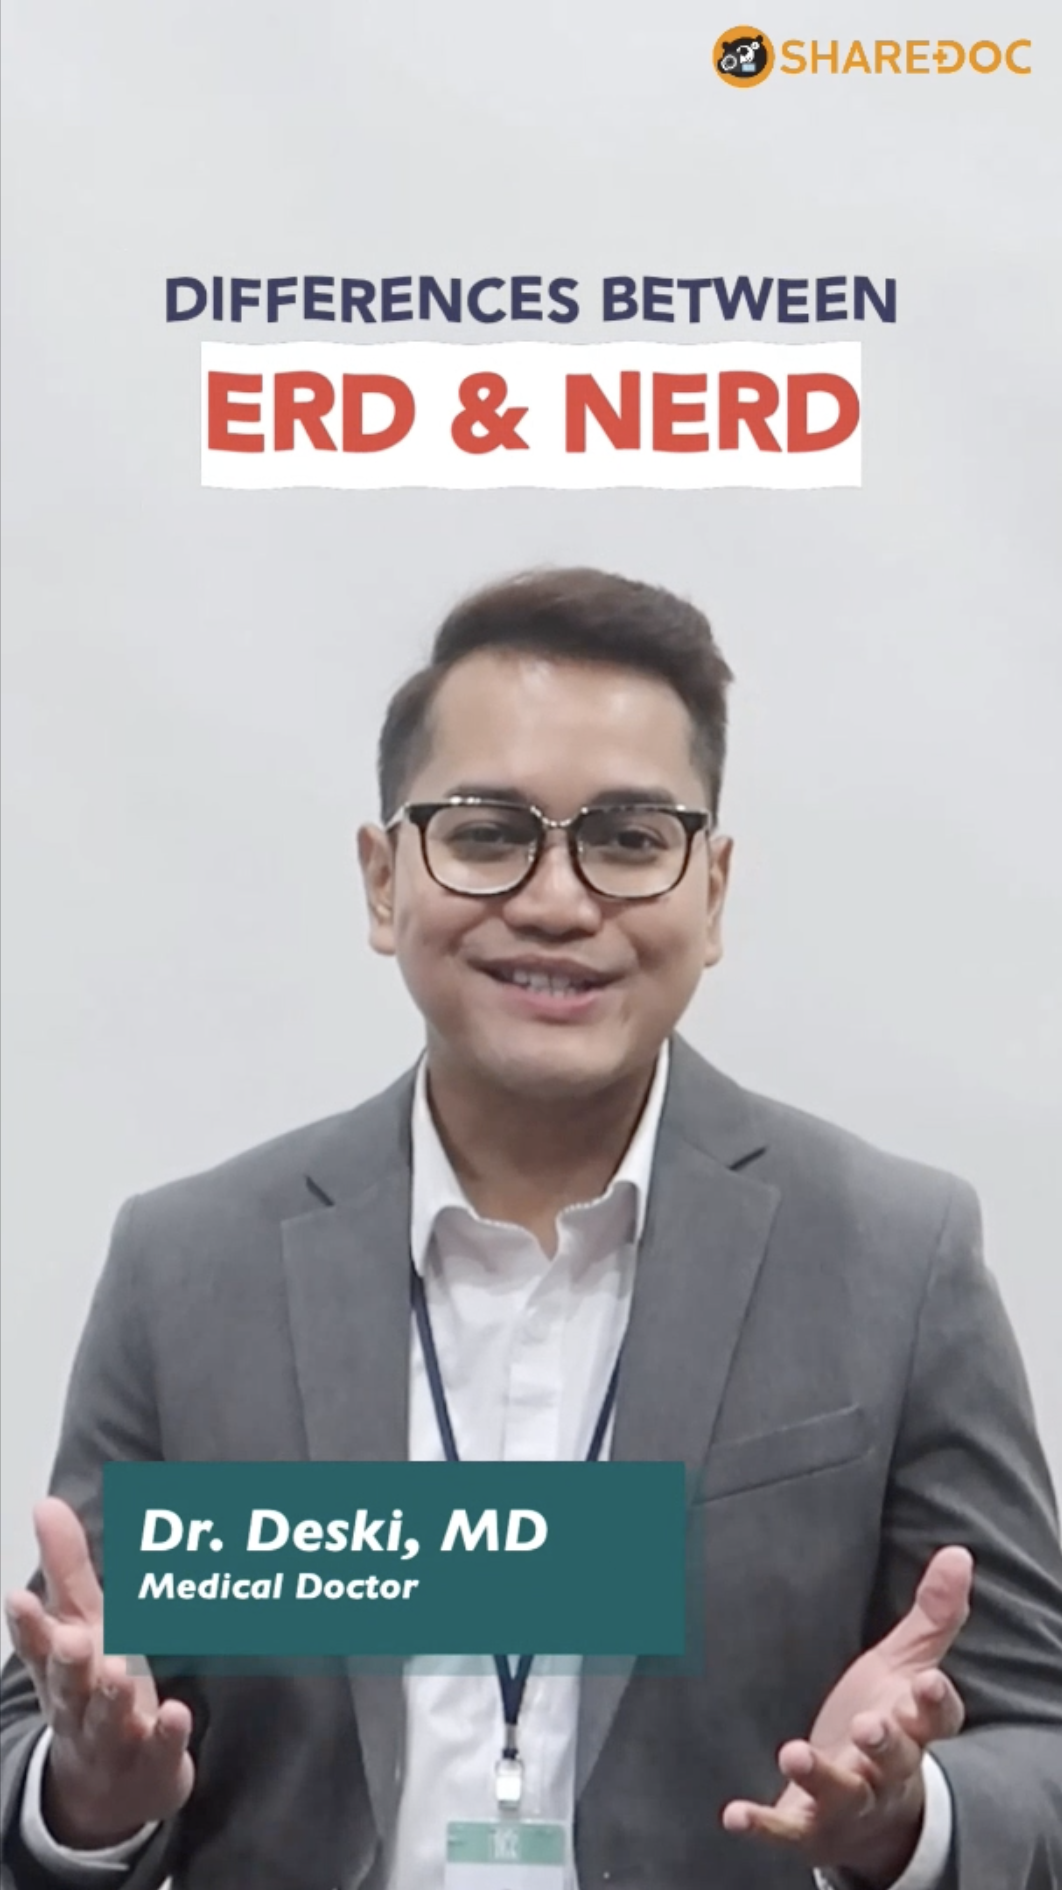 Differences between ERD and NERD according to Latest Guidelines